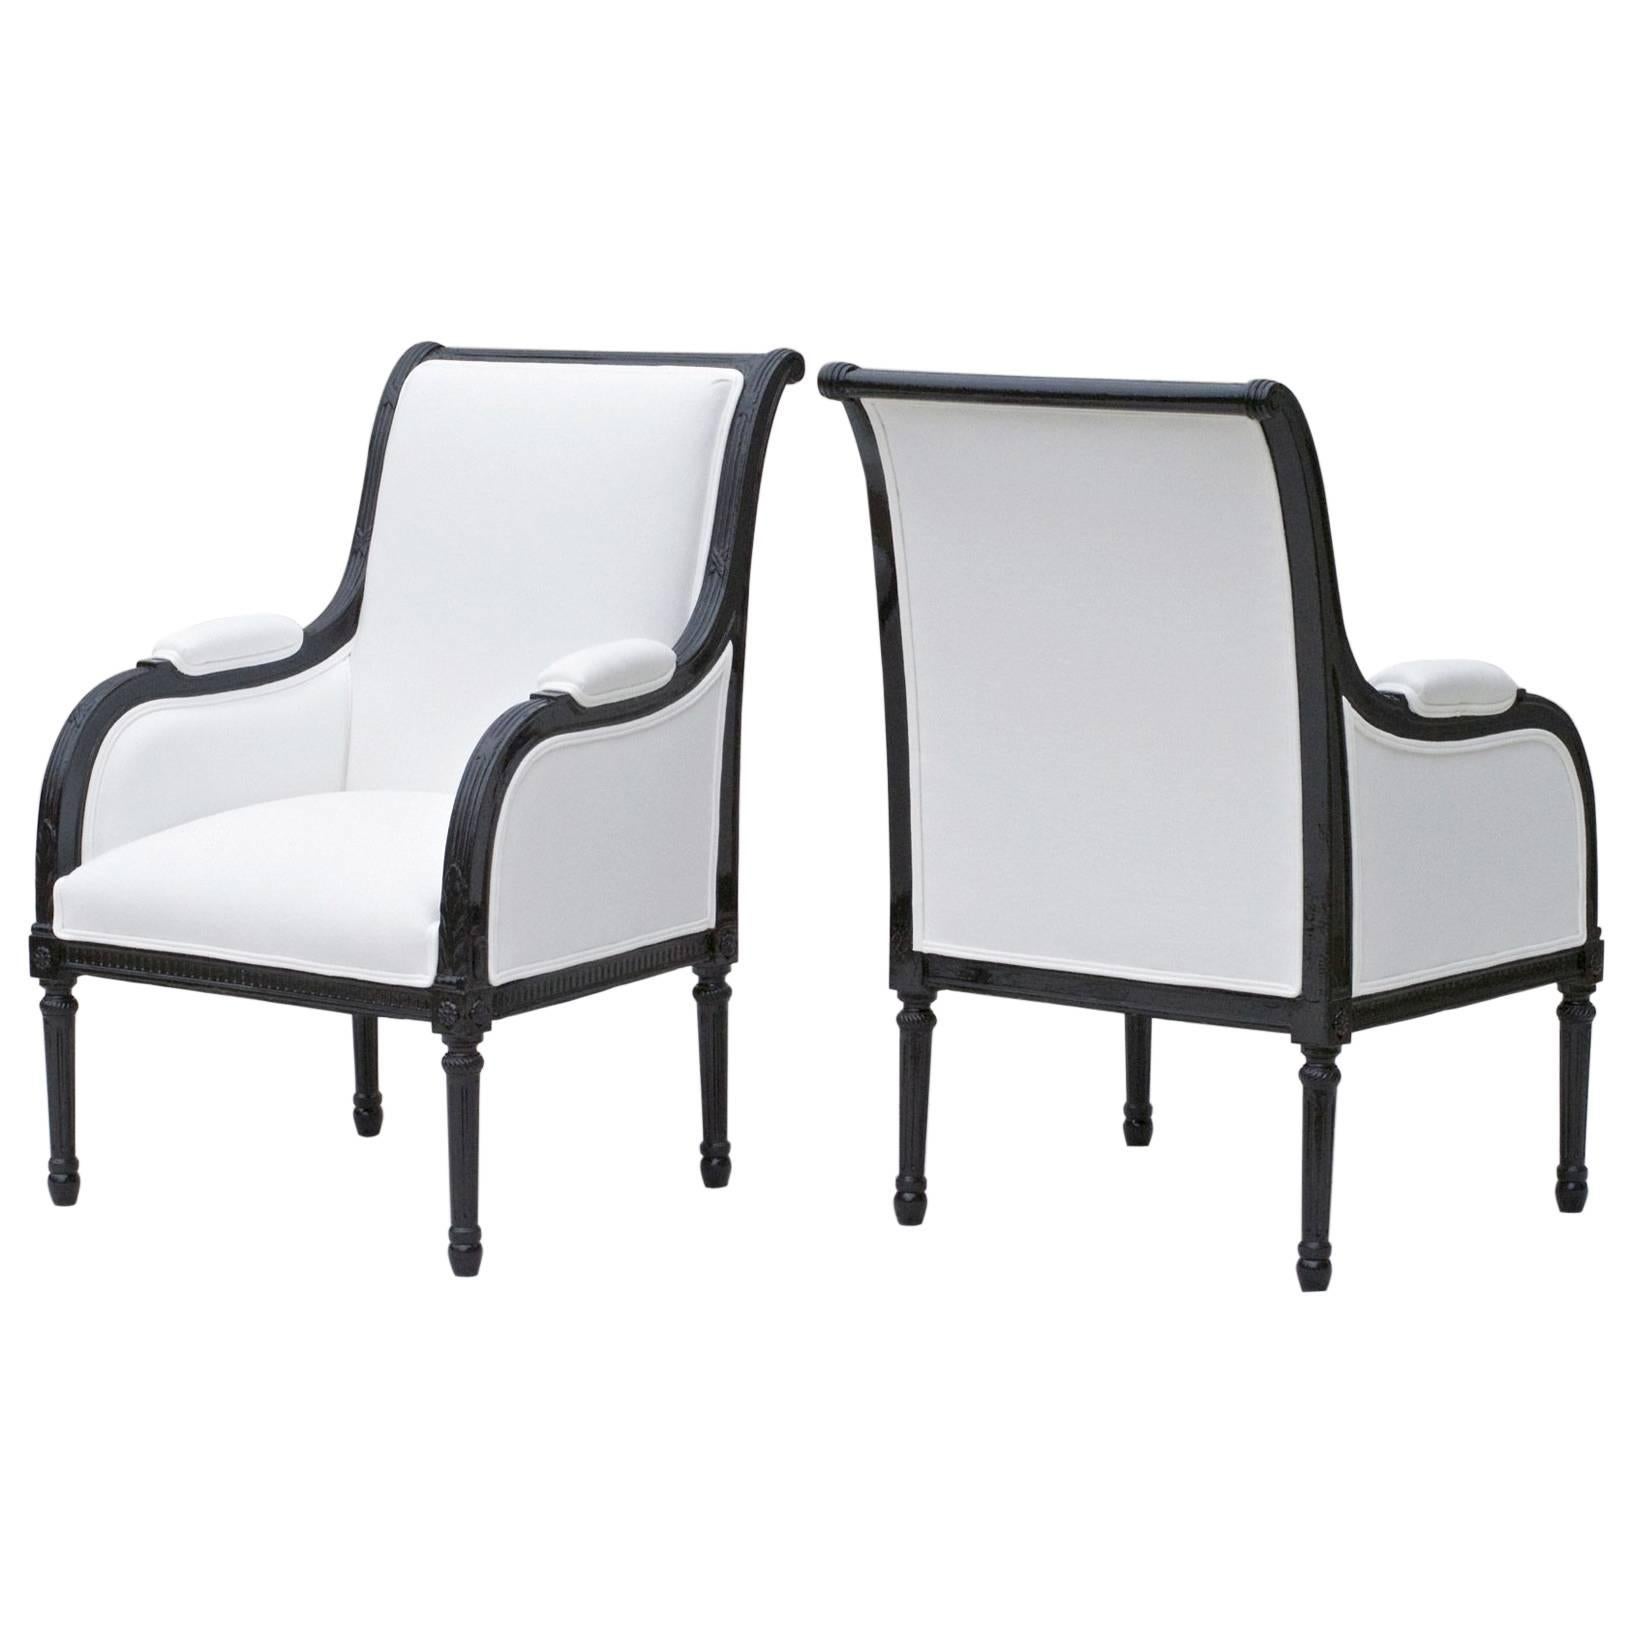 Directoire Styled Library Chairs in Black and White